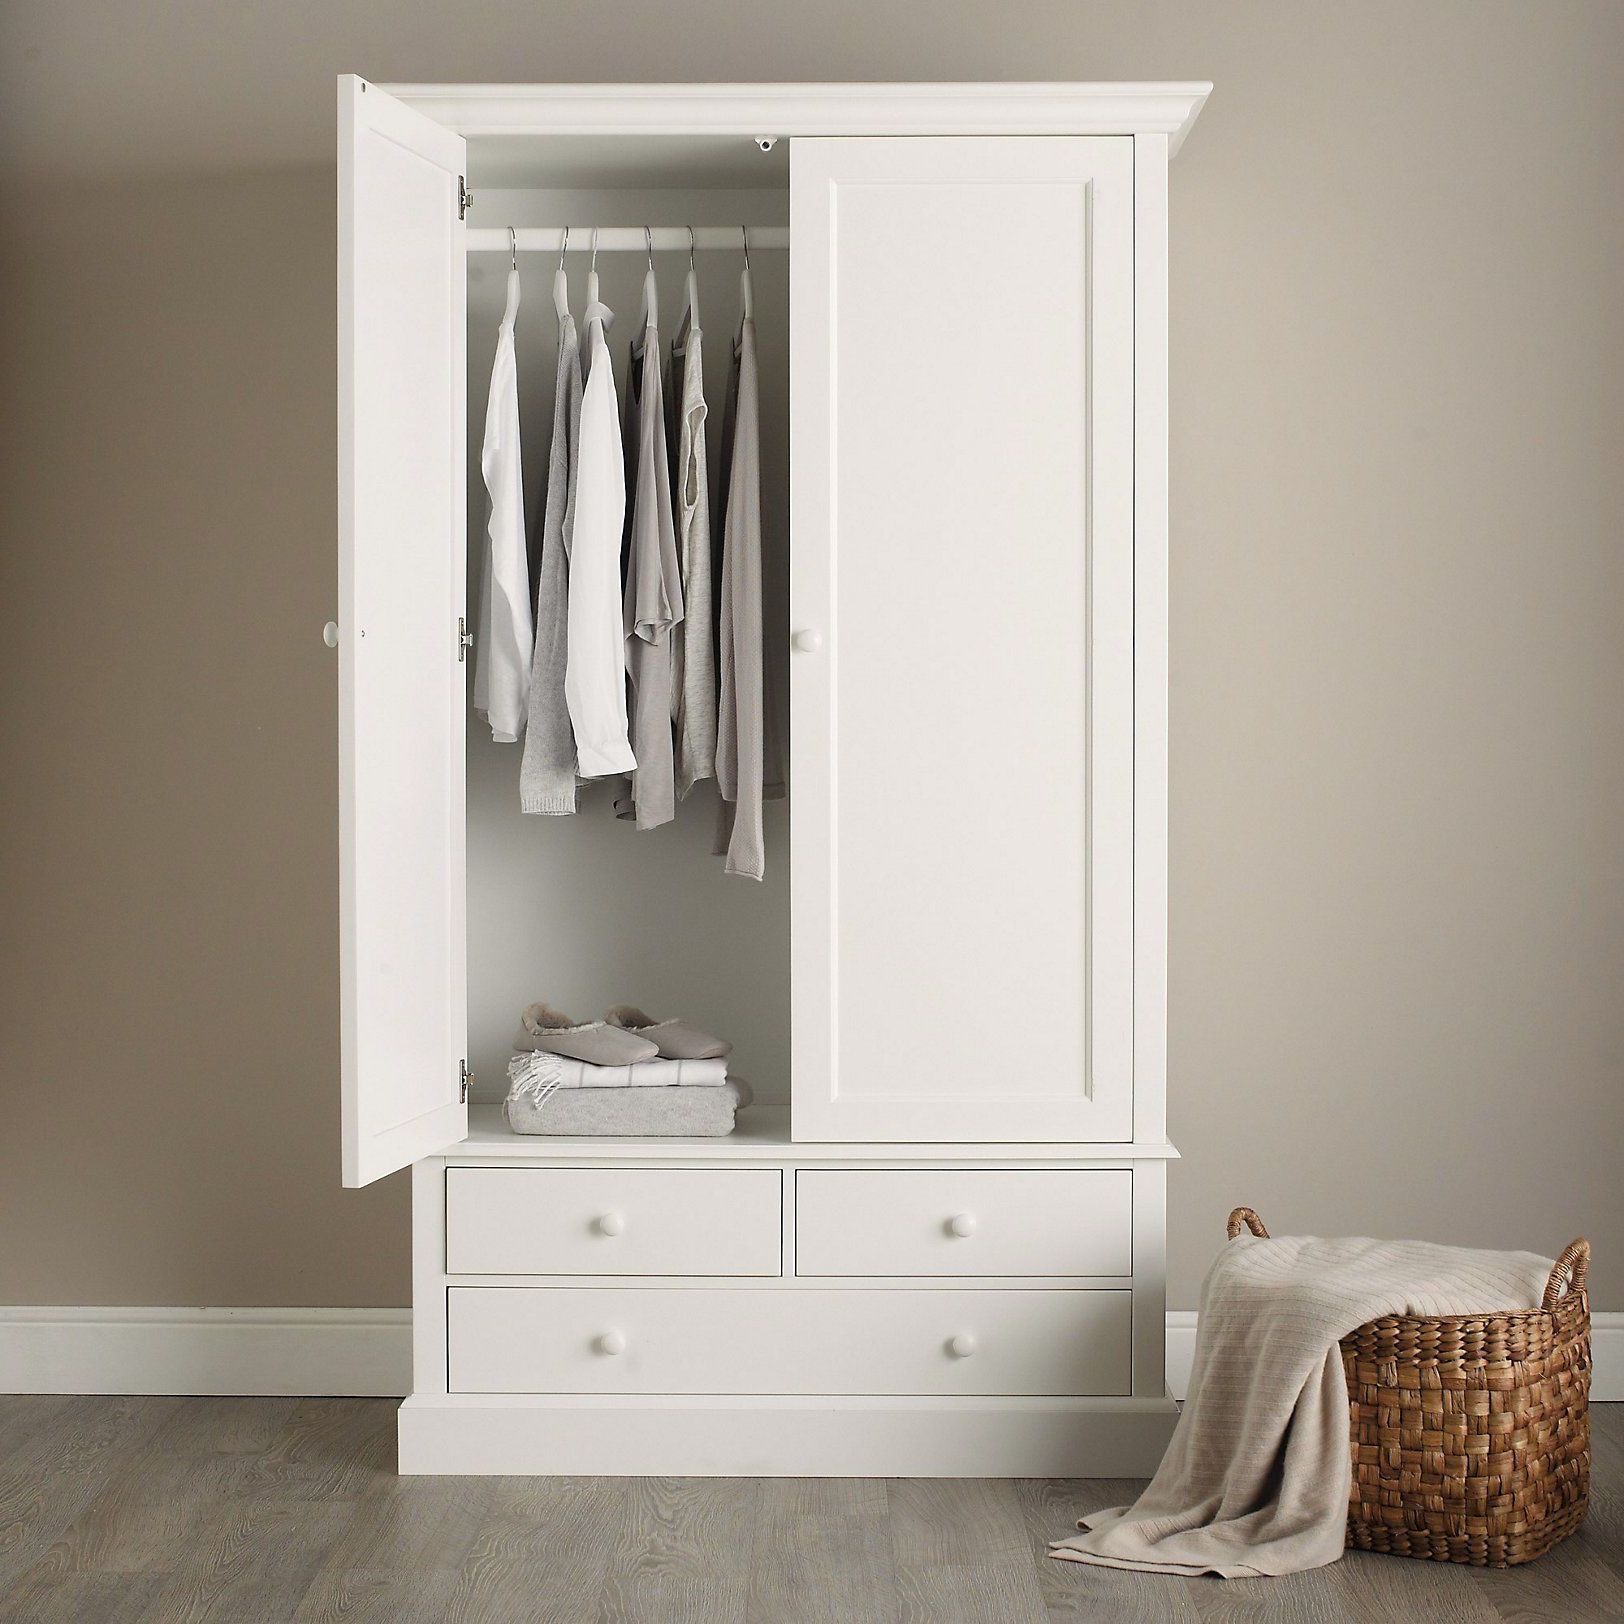 Classic Large Wardrobe | Bedroom Furniture | The White Company | Classic  Bedroom Furniture, White Wooden Wardrobe, Large Wardrobes Throughout White Wooden Wardrobes (Gallery 11 of 20)